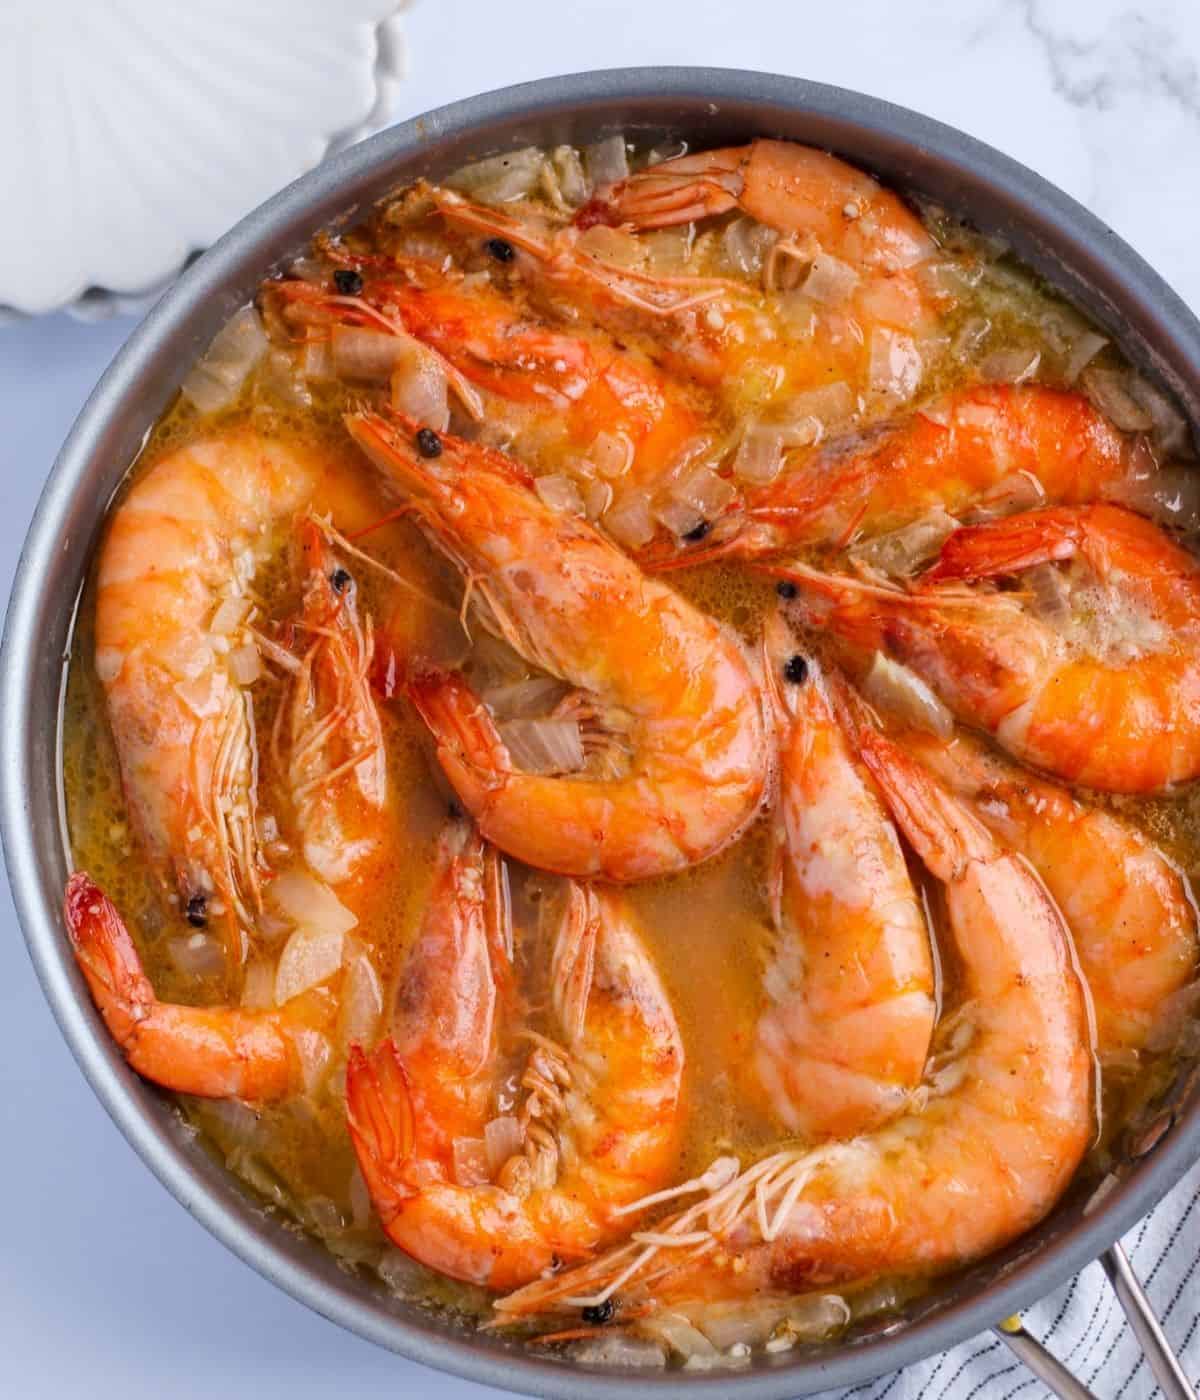 Finish dish of butter shrimp in a skillet.